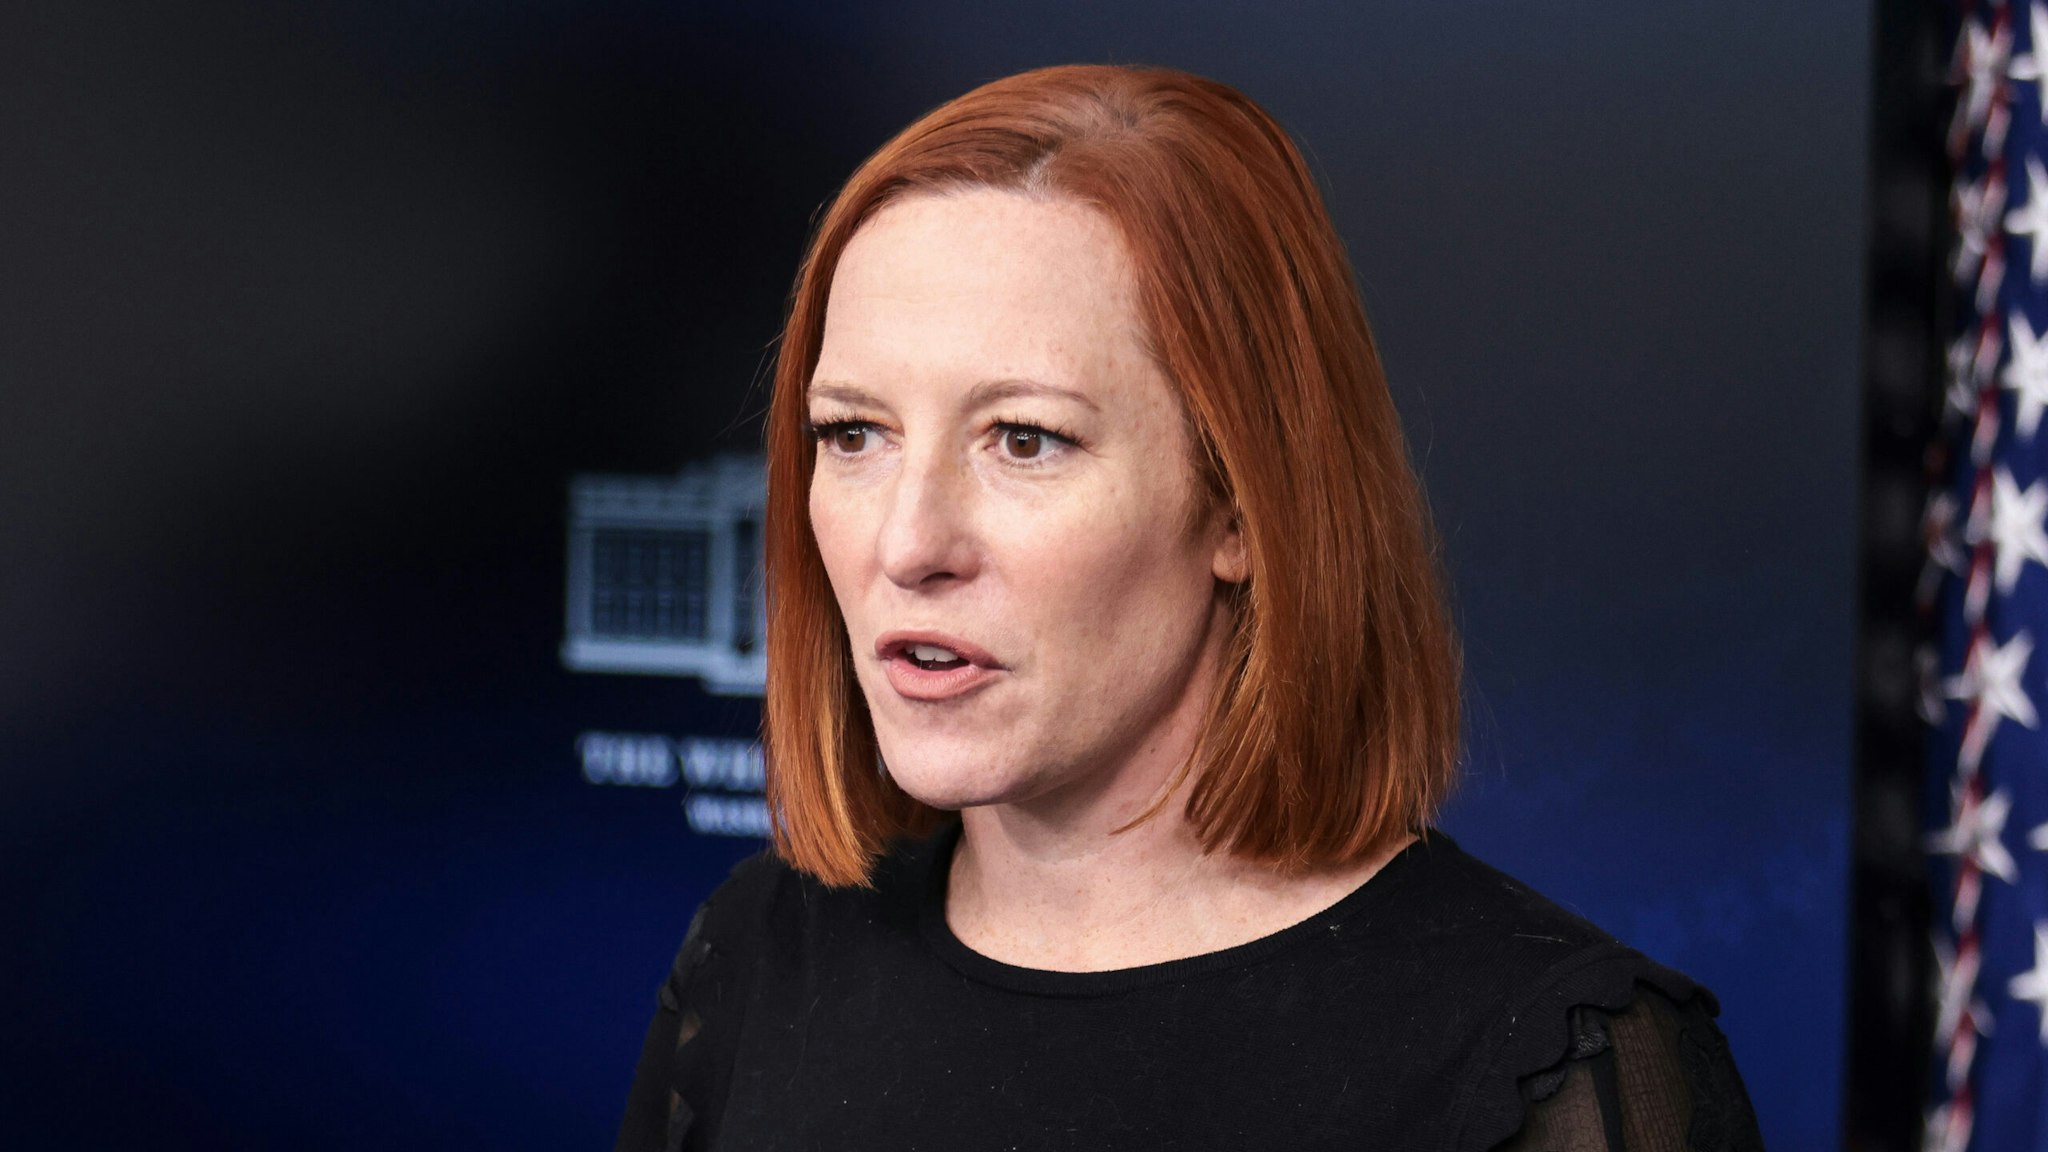 Jen Psaki, White House press secretary, speaks during a news conference in the James S. Brady Press Briefing Room at the White House in Washington, D.C., U.S., on Thursday, Jan. 13, 2022. Some of the world's largest technology firms are meeting at the White House today in an effort to improve open-source software security.